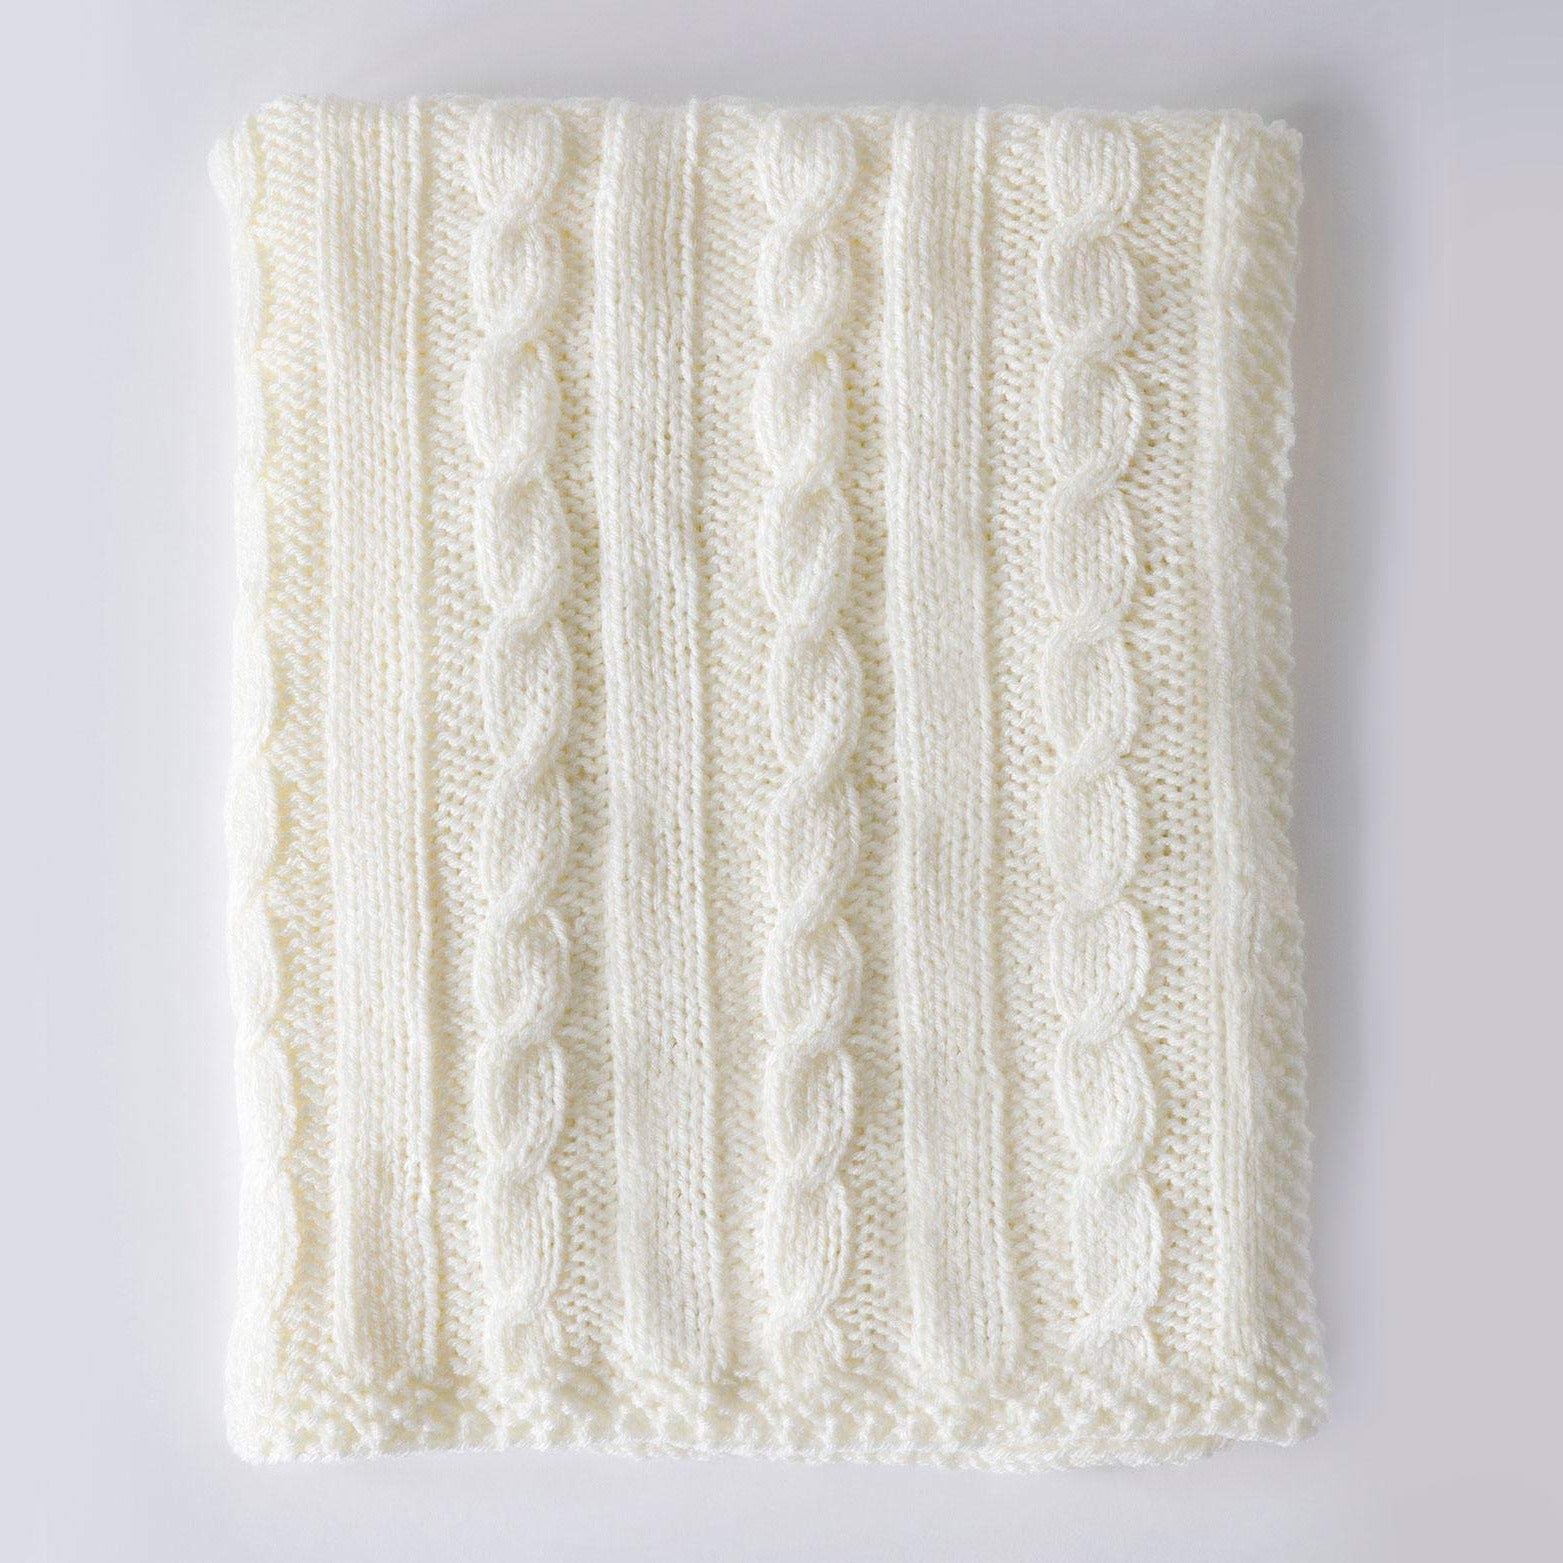 Simple Cable Knit Baby Blanket Knitting Pattern